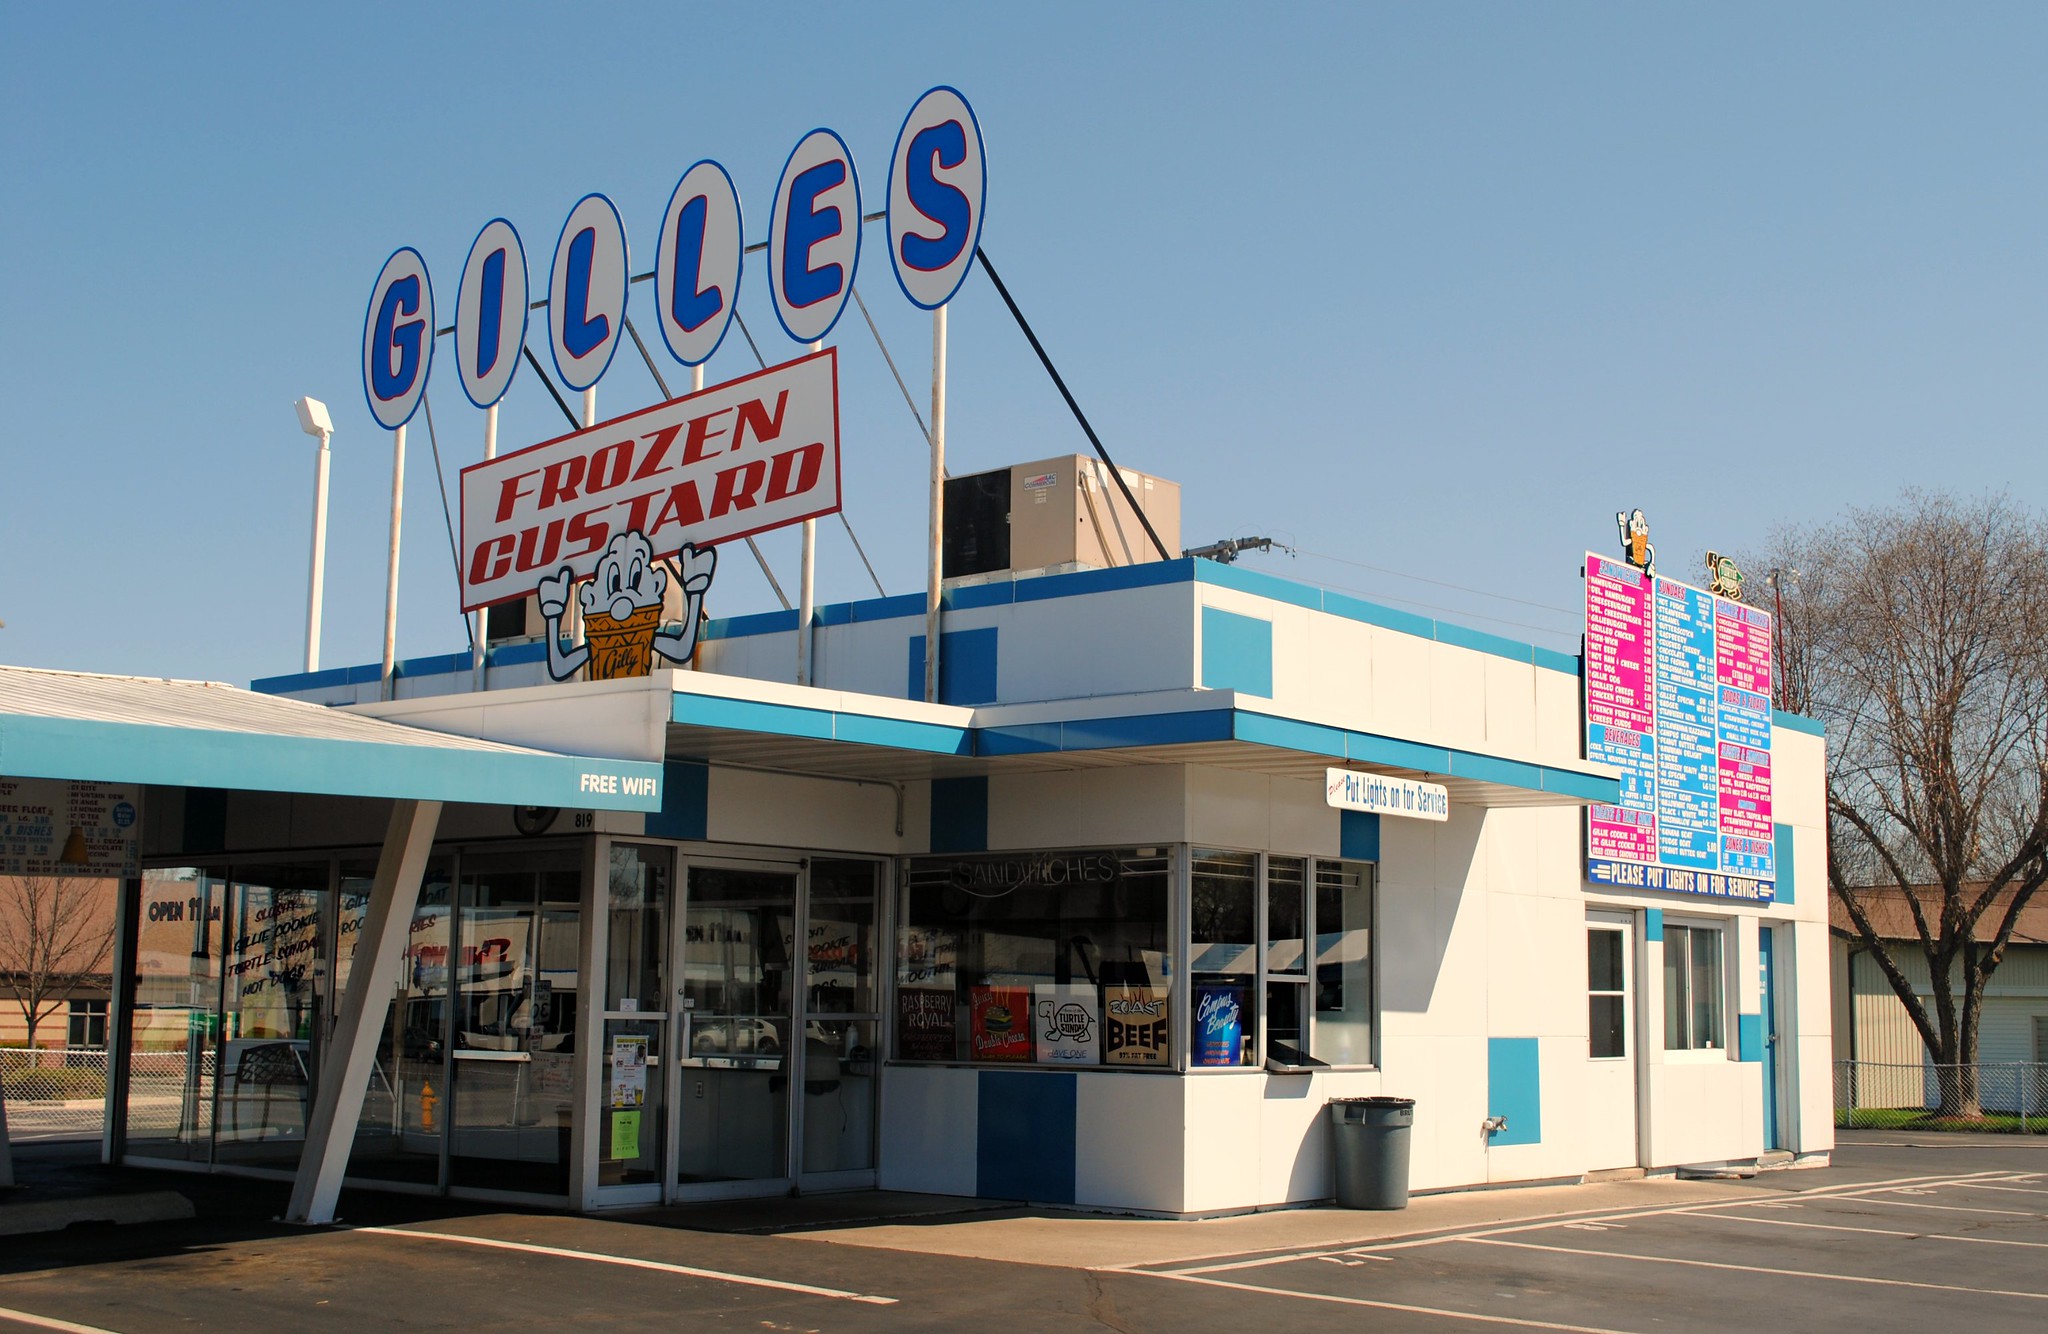 A retro-looking 'Gilles' sign sits atop the building with blue accents.